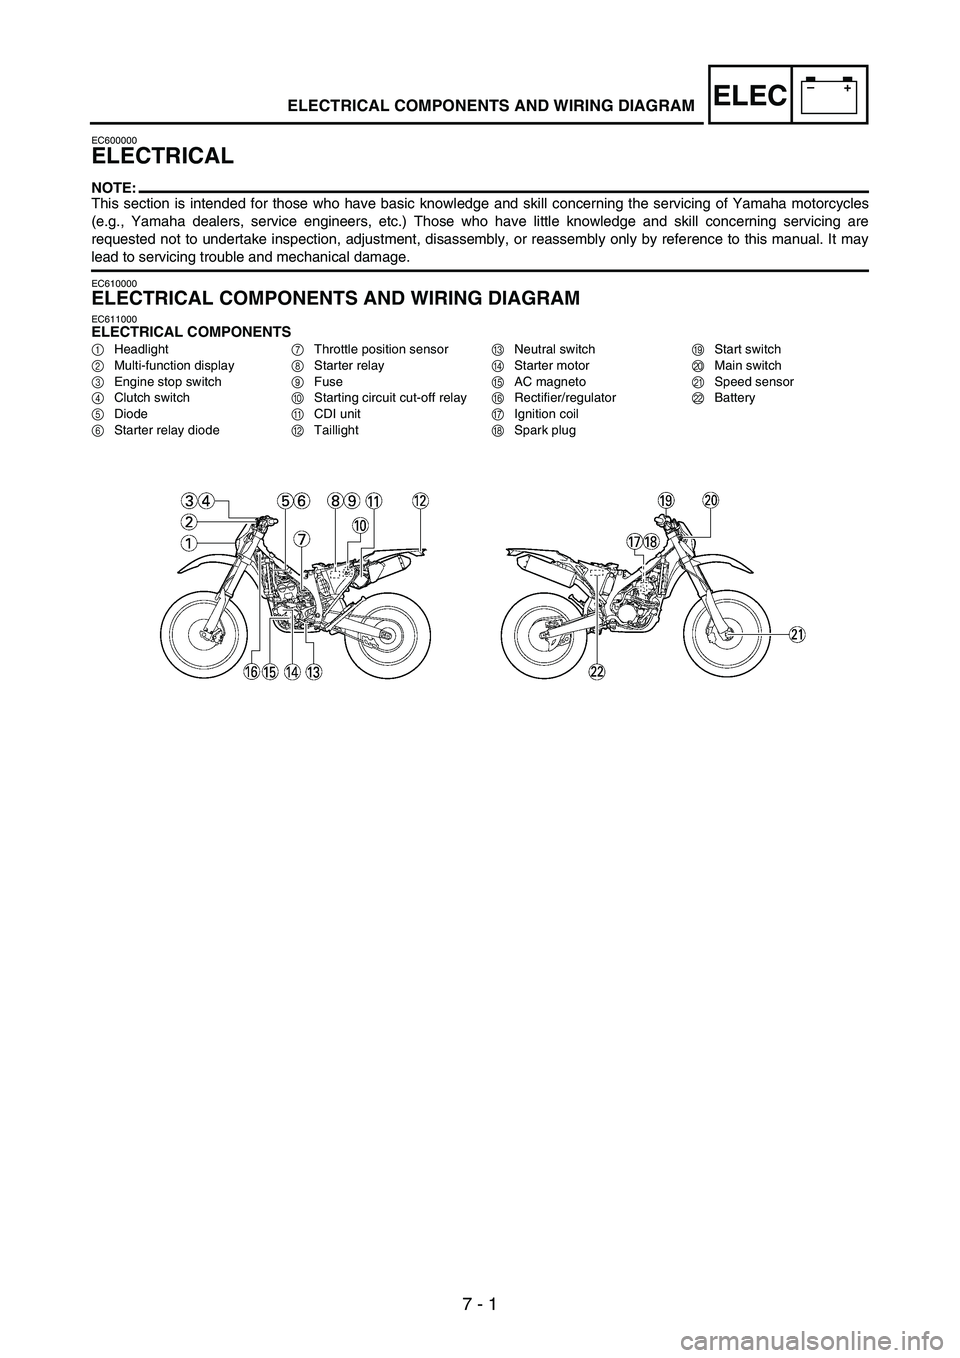 YAMAHA WR 250F 2007  Betriebsanleitungen (in German) 7 - 1
–+ELECELECTRICAL COMPONENTS AND WIRING DIAGRAM
EC600000
ELECTRICAL
NOTE:This section is intended for those who have basic knowledge and skill concerning the servicing of Yamaha motorcycles
(e.